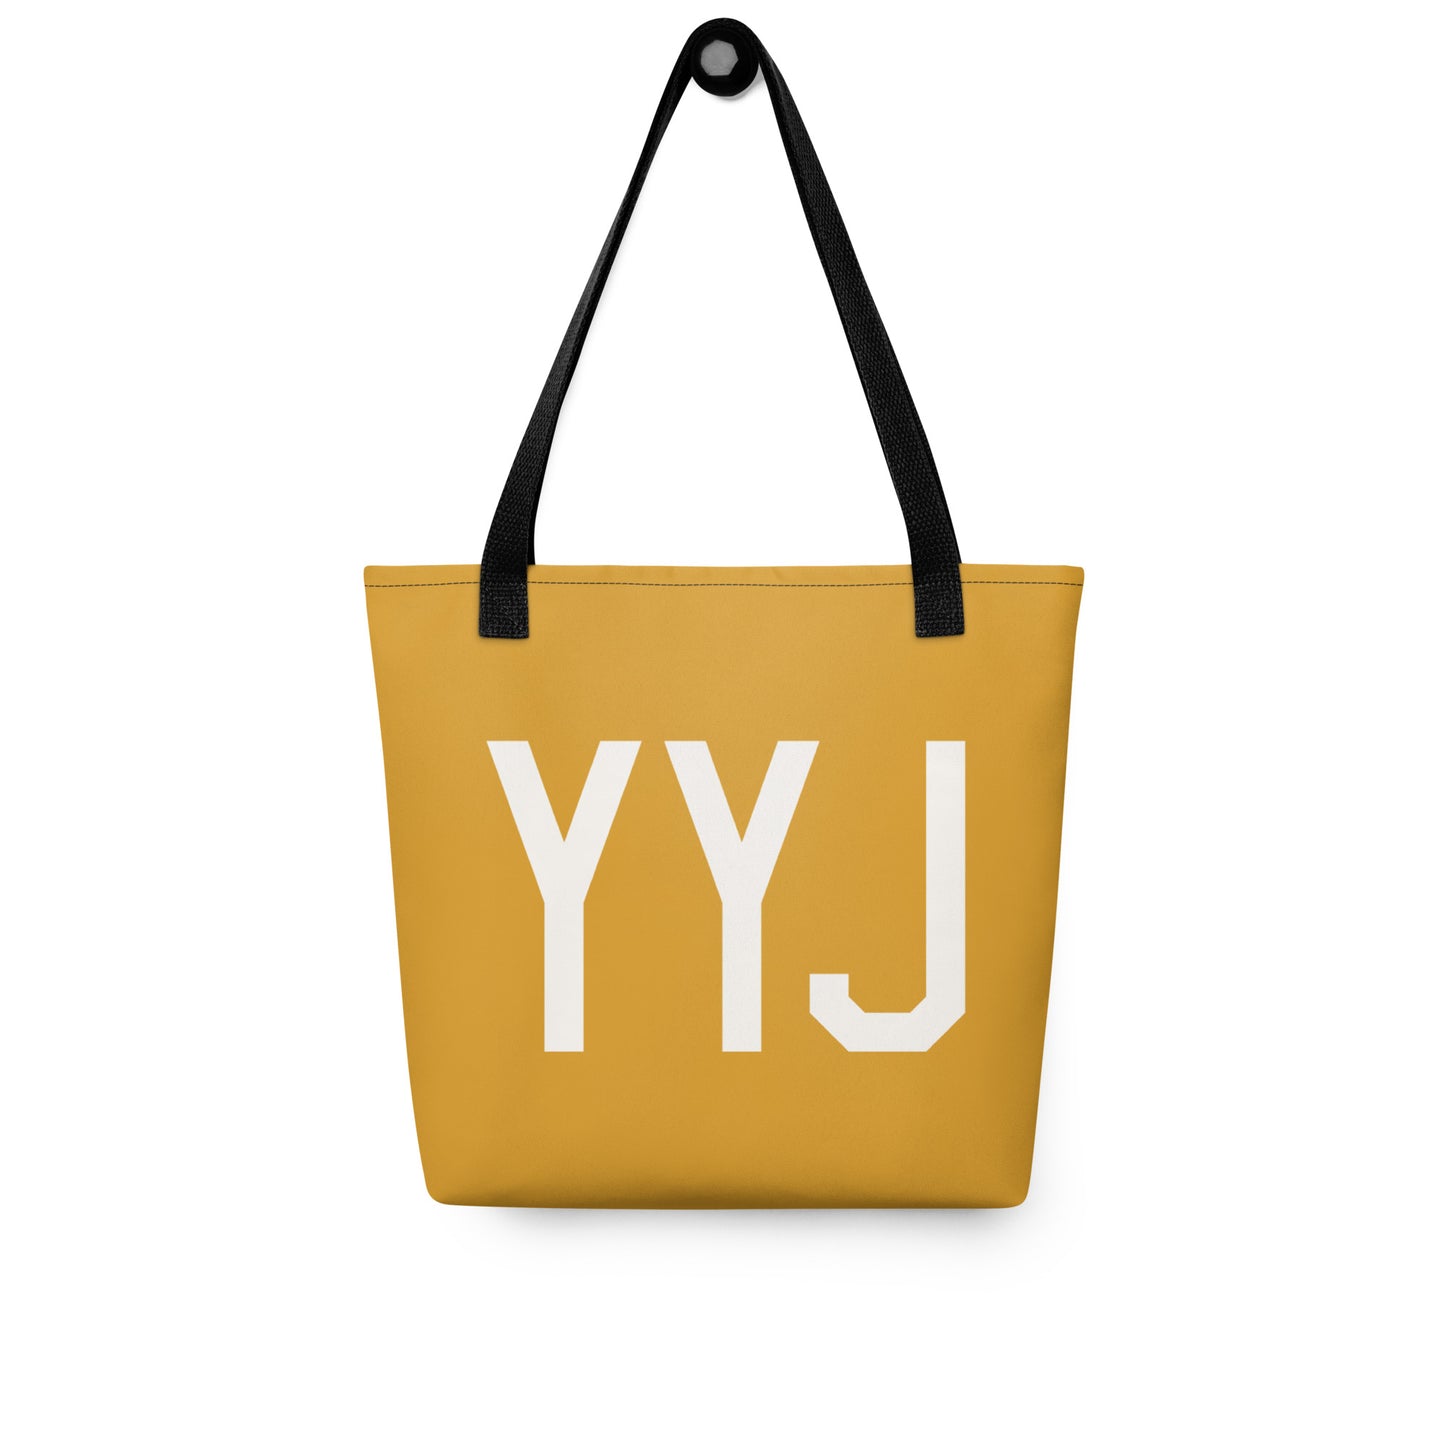 Airport Code Tote - Buttercup • YYJ Victoria • YHM Designs - Image 03